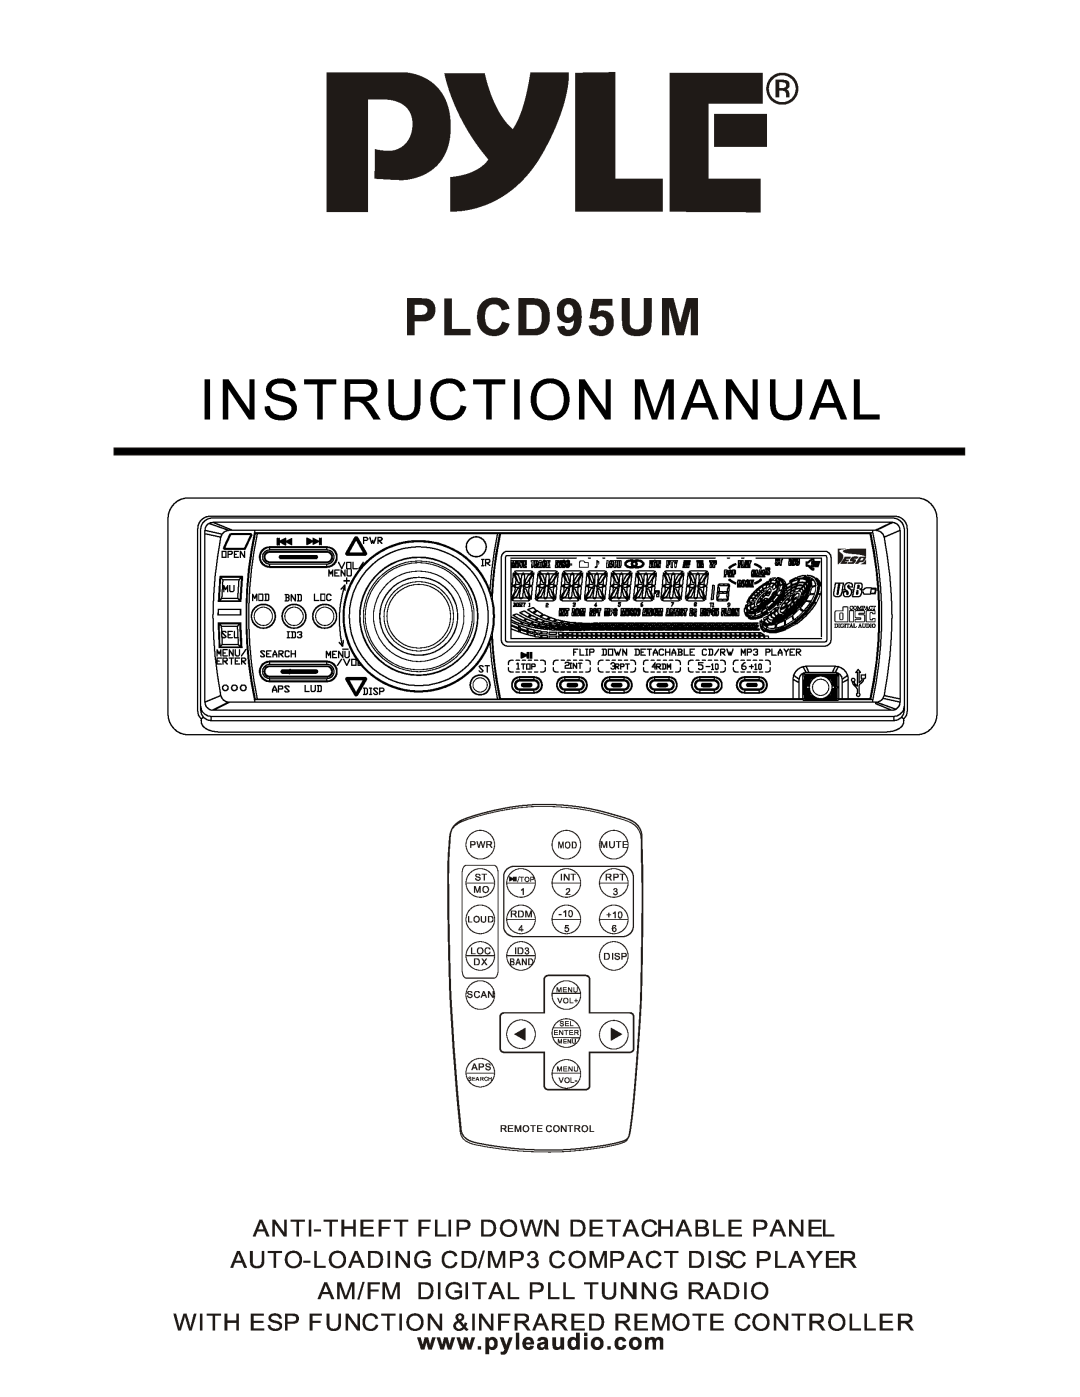 PYLE Audio PLCD95UM instruction manual With Esp Function &Infrared Remote Controller, Mute, Loud, Disp, Scan 